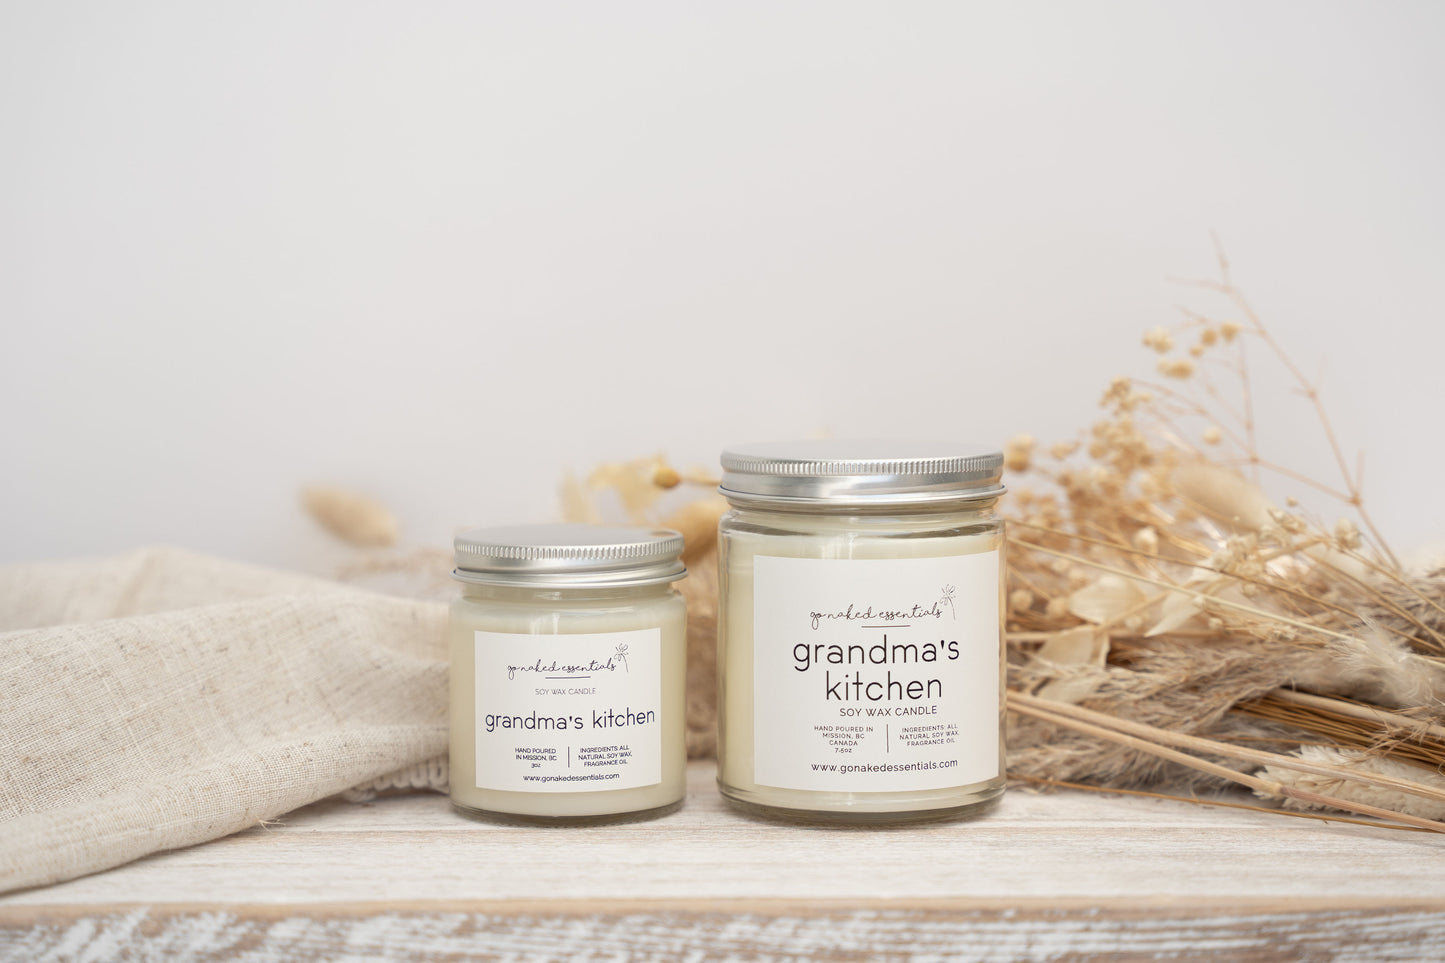 Grandma's Kitchen Soy Candle